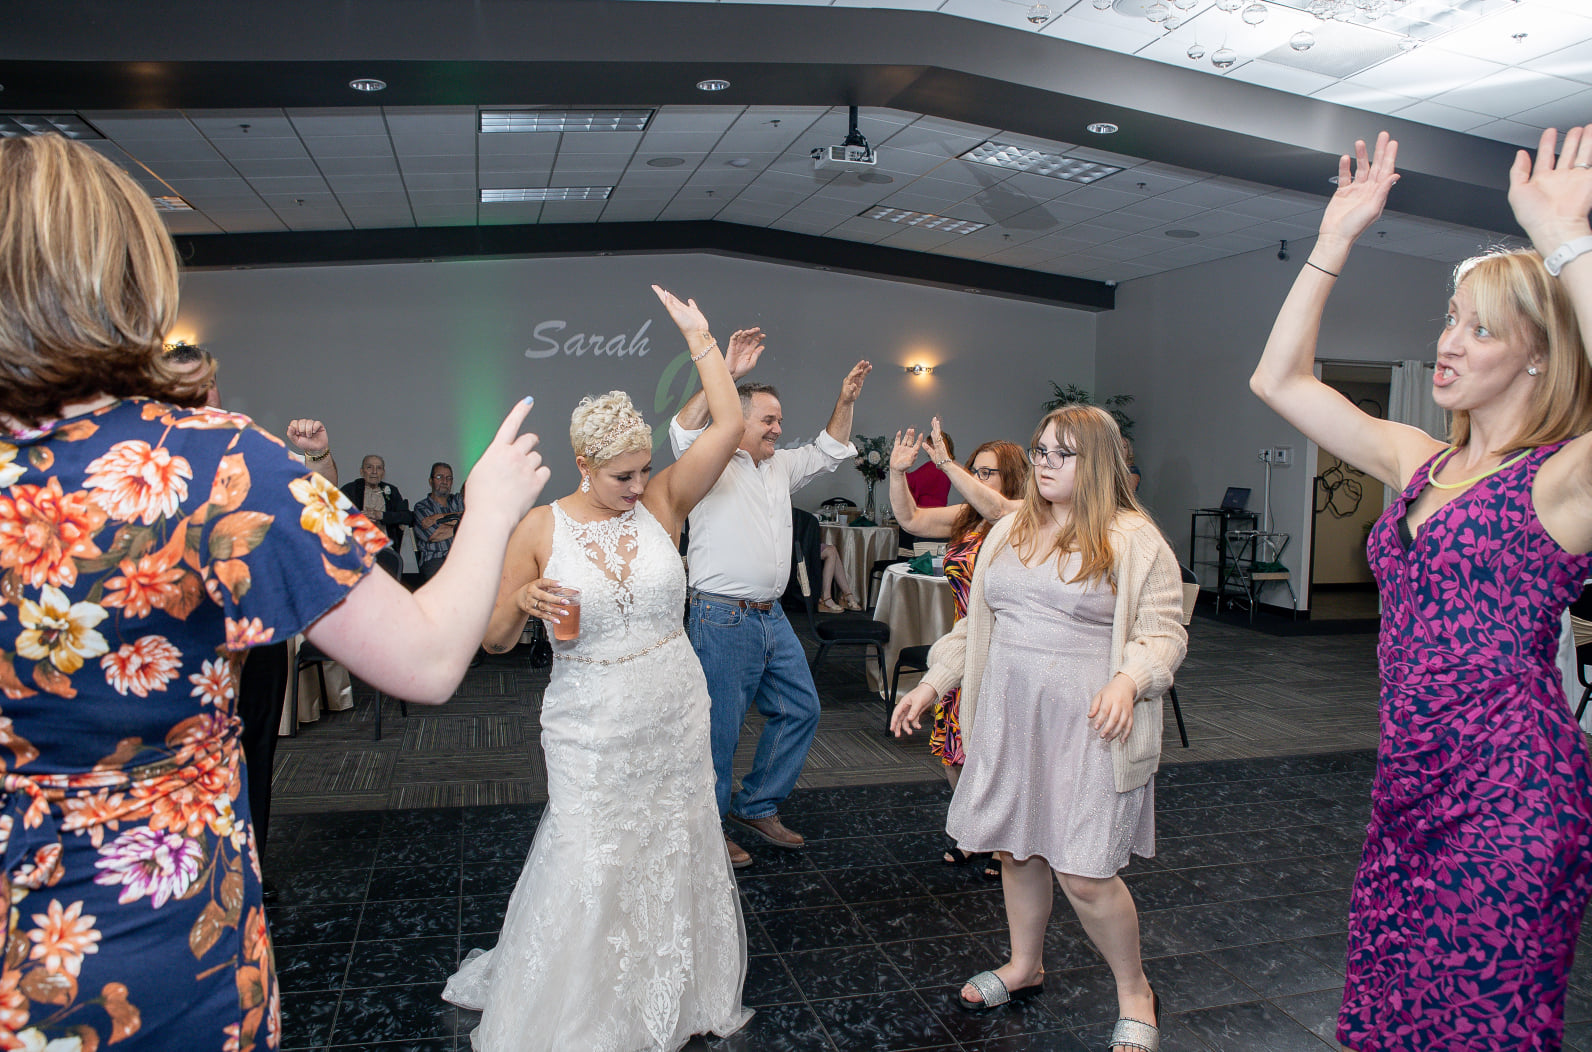 Group of people dancing to music at a wedding 